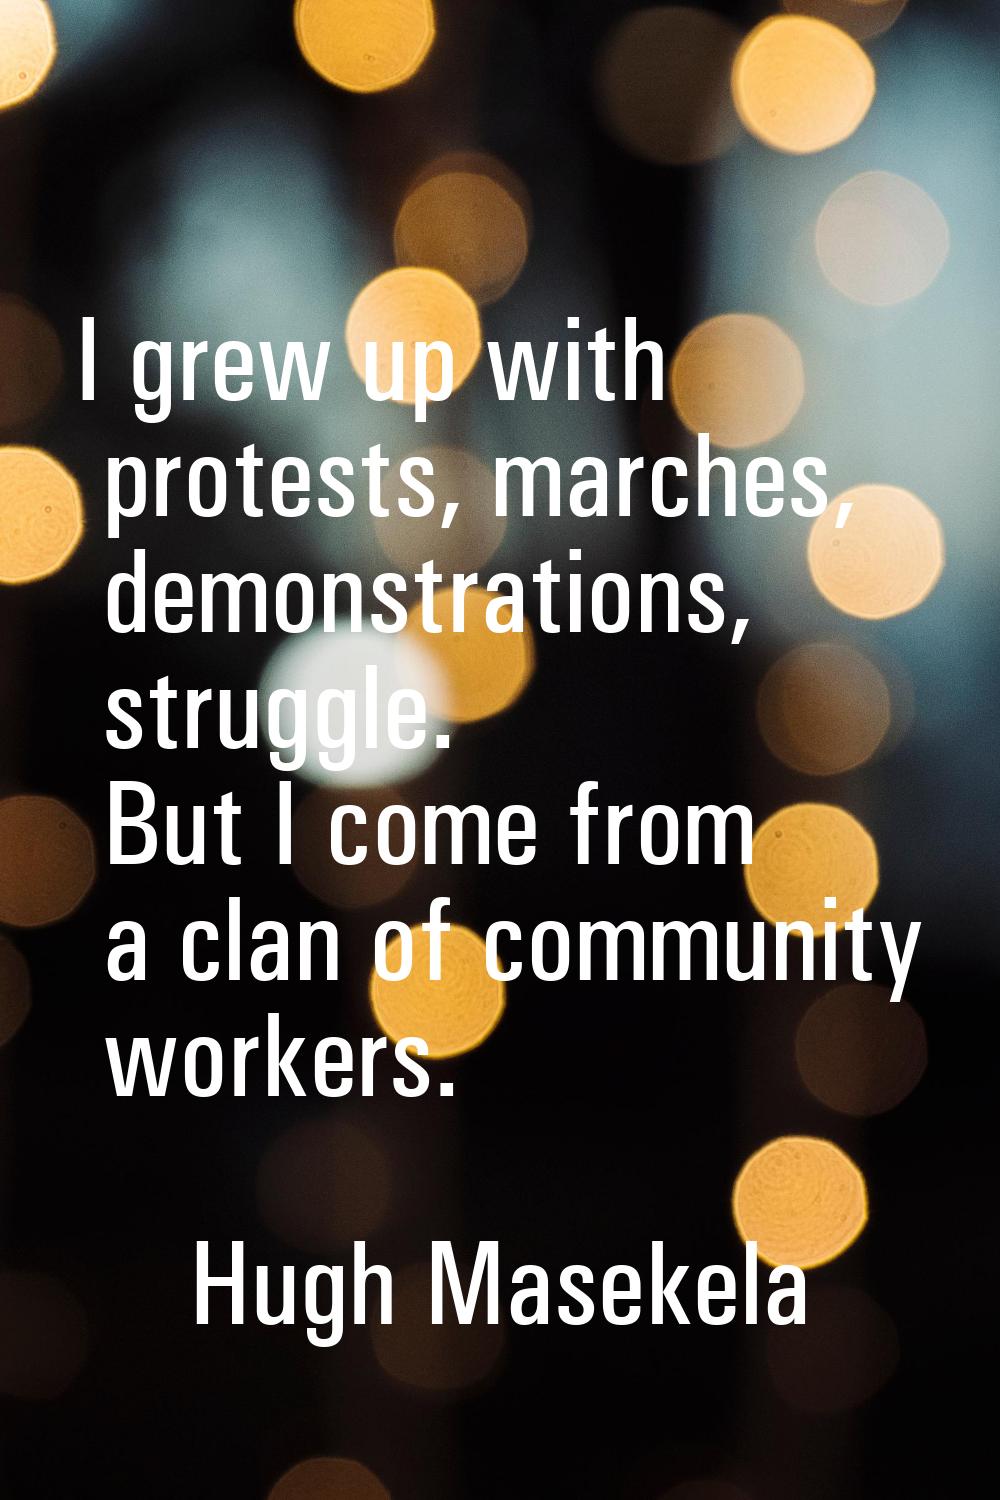 I grew up with protests, marches, demonstrations, struggle. But I come from a clan of community wor